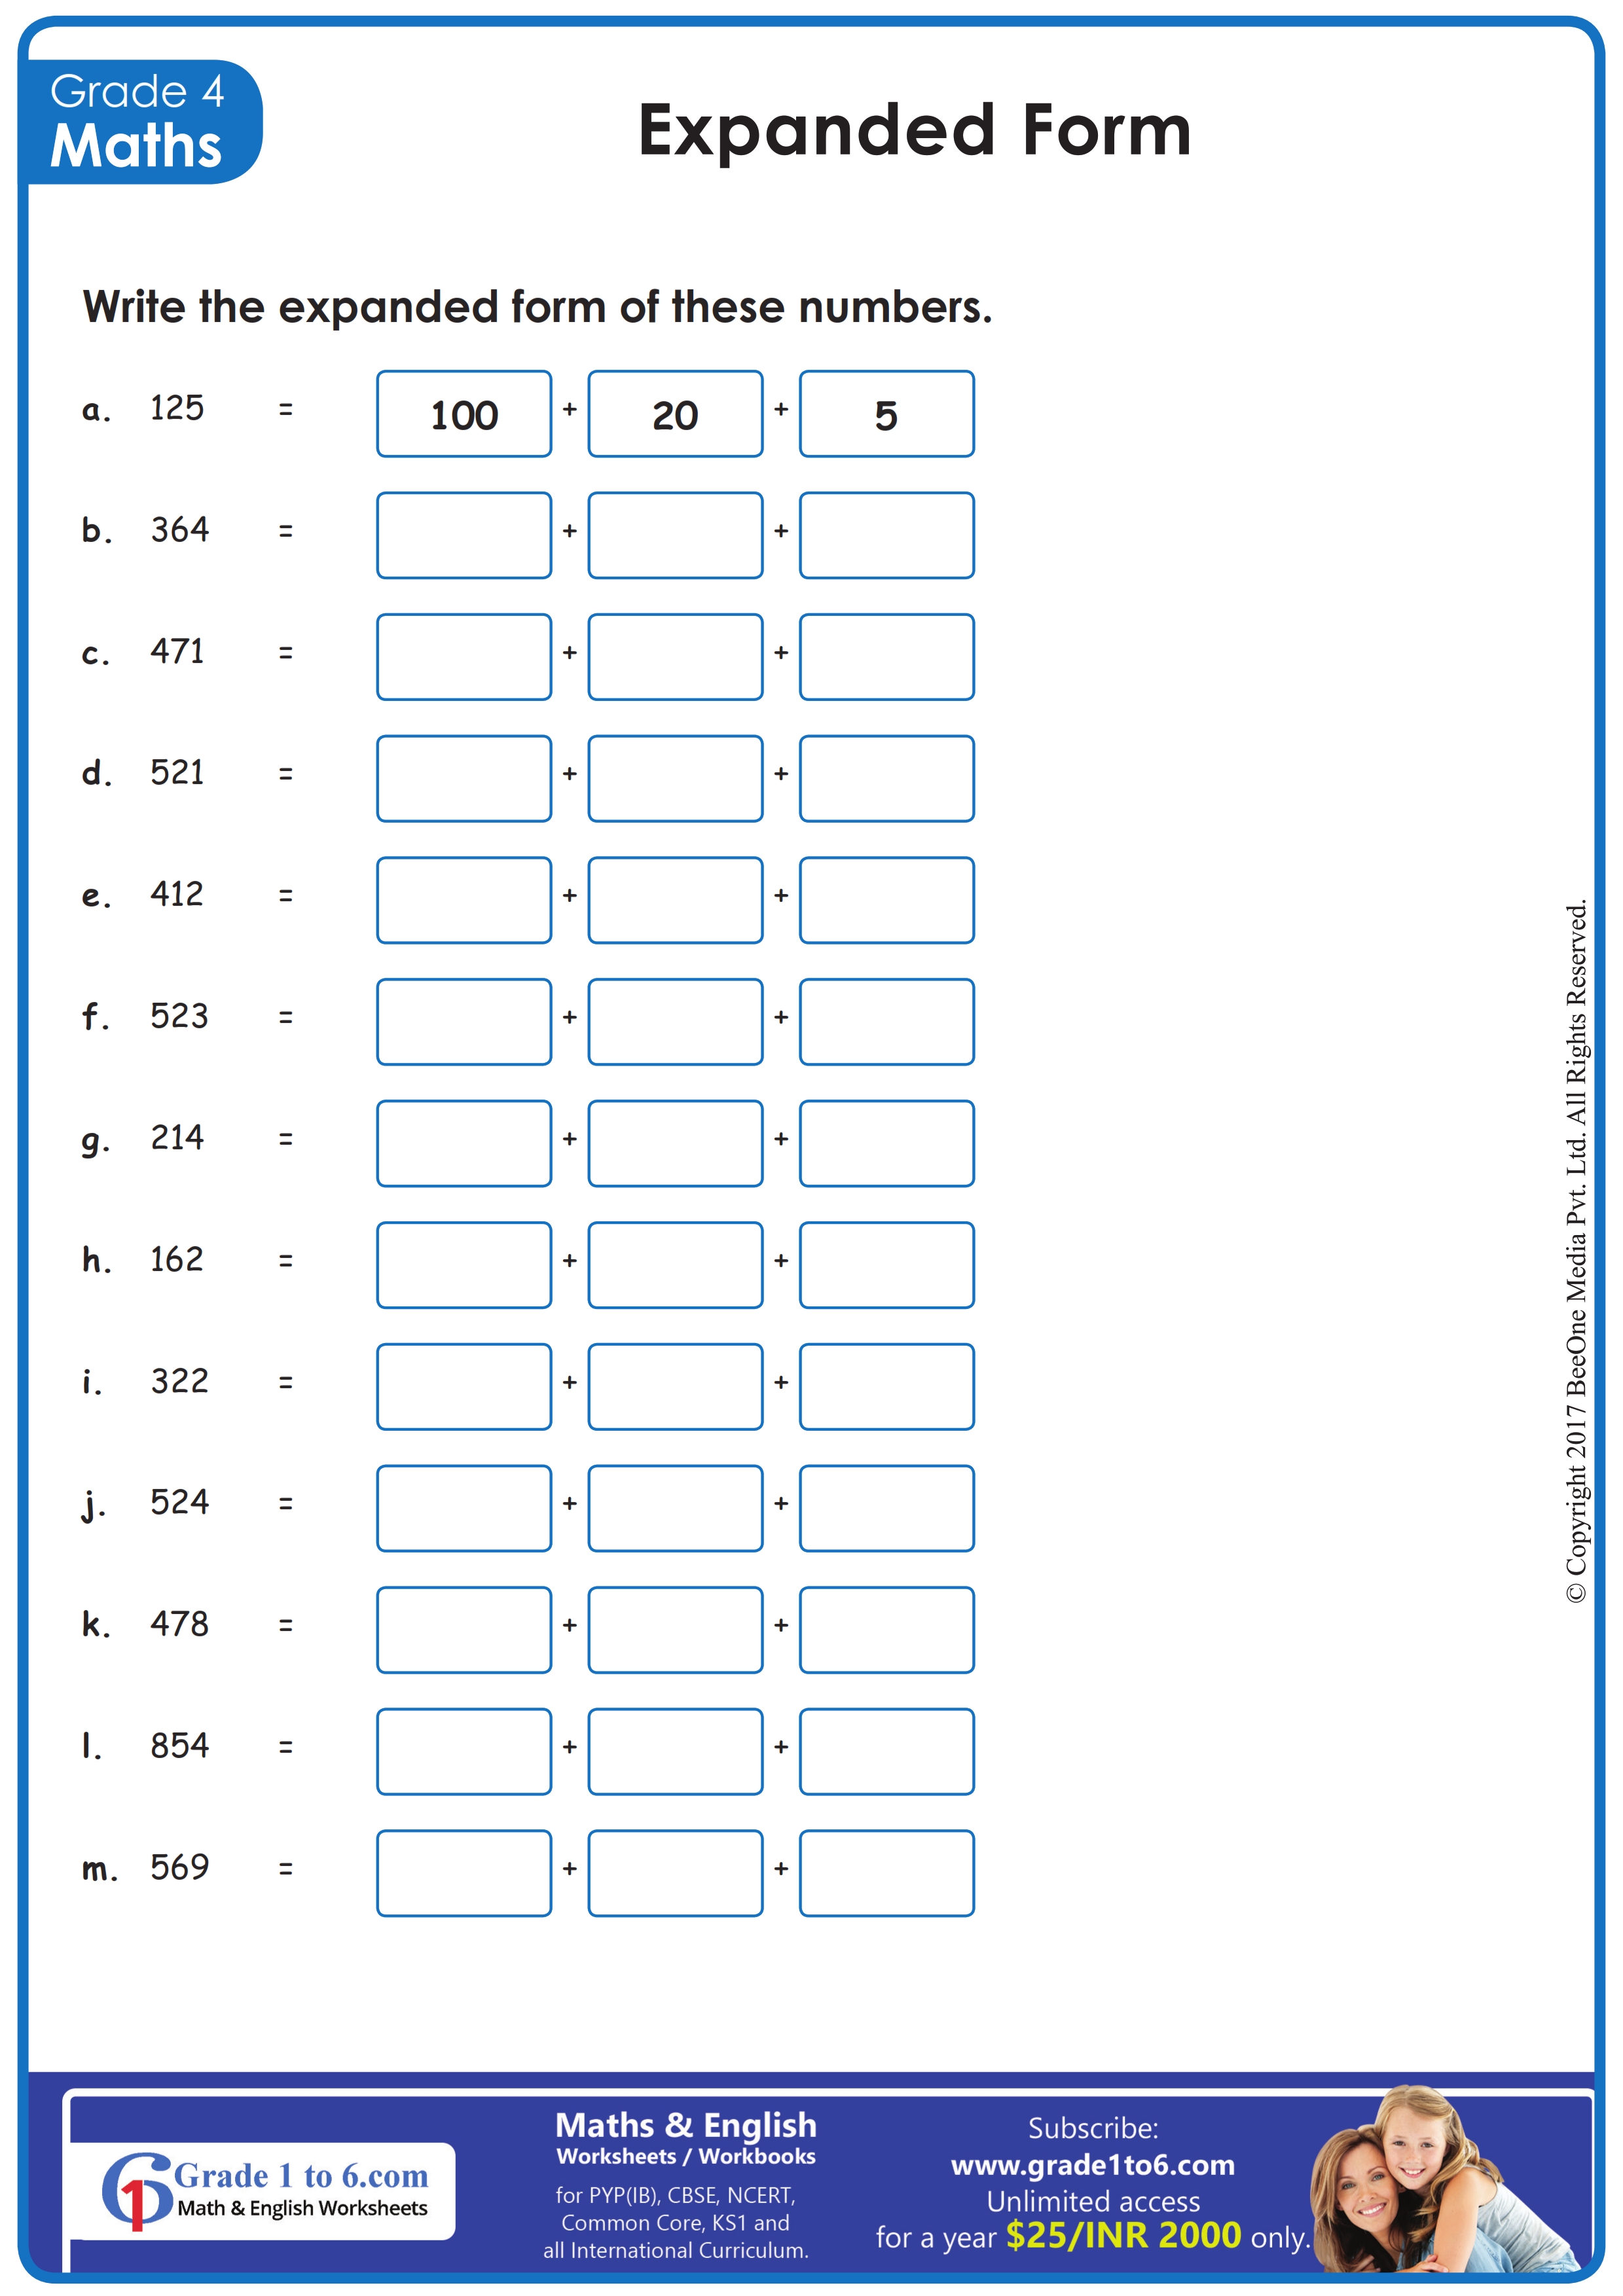 expanded-form-of-numbers-worksheet-grade1to6